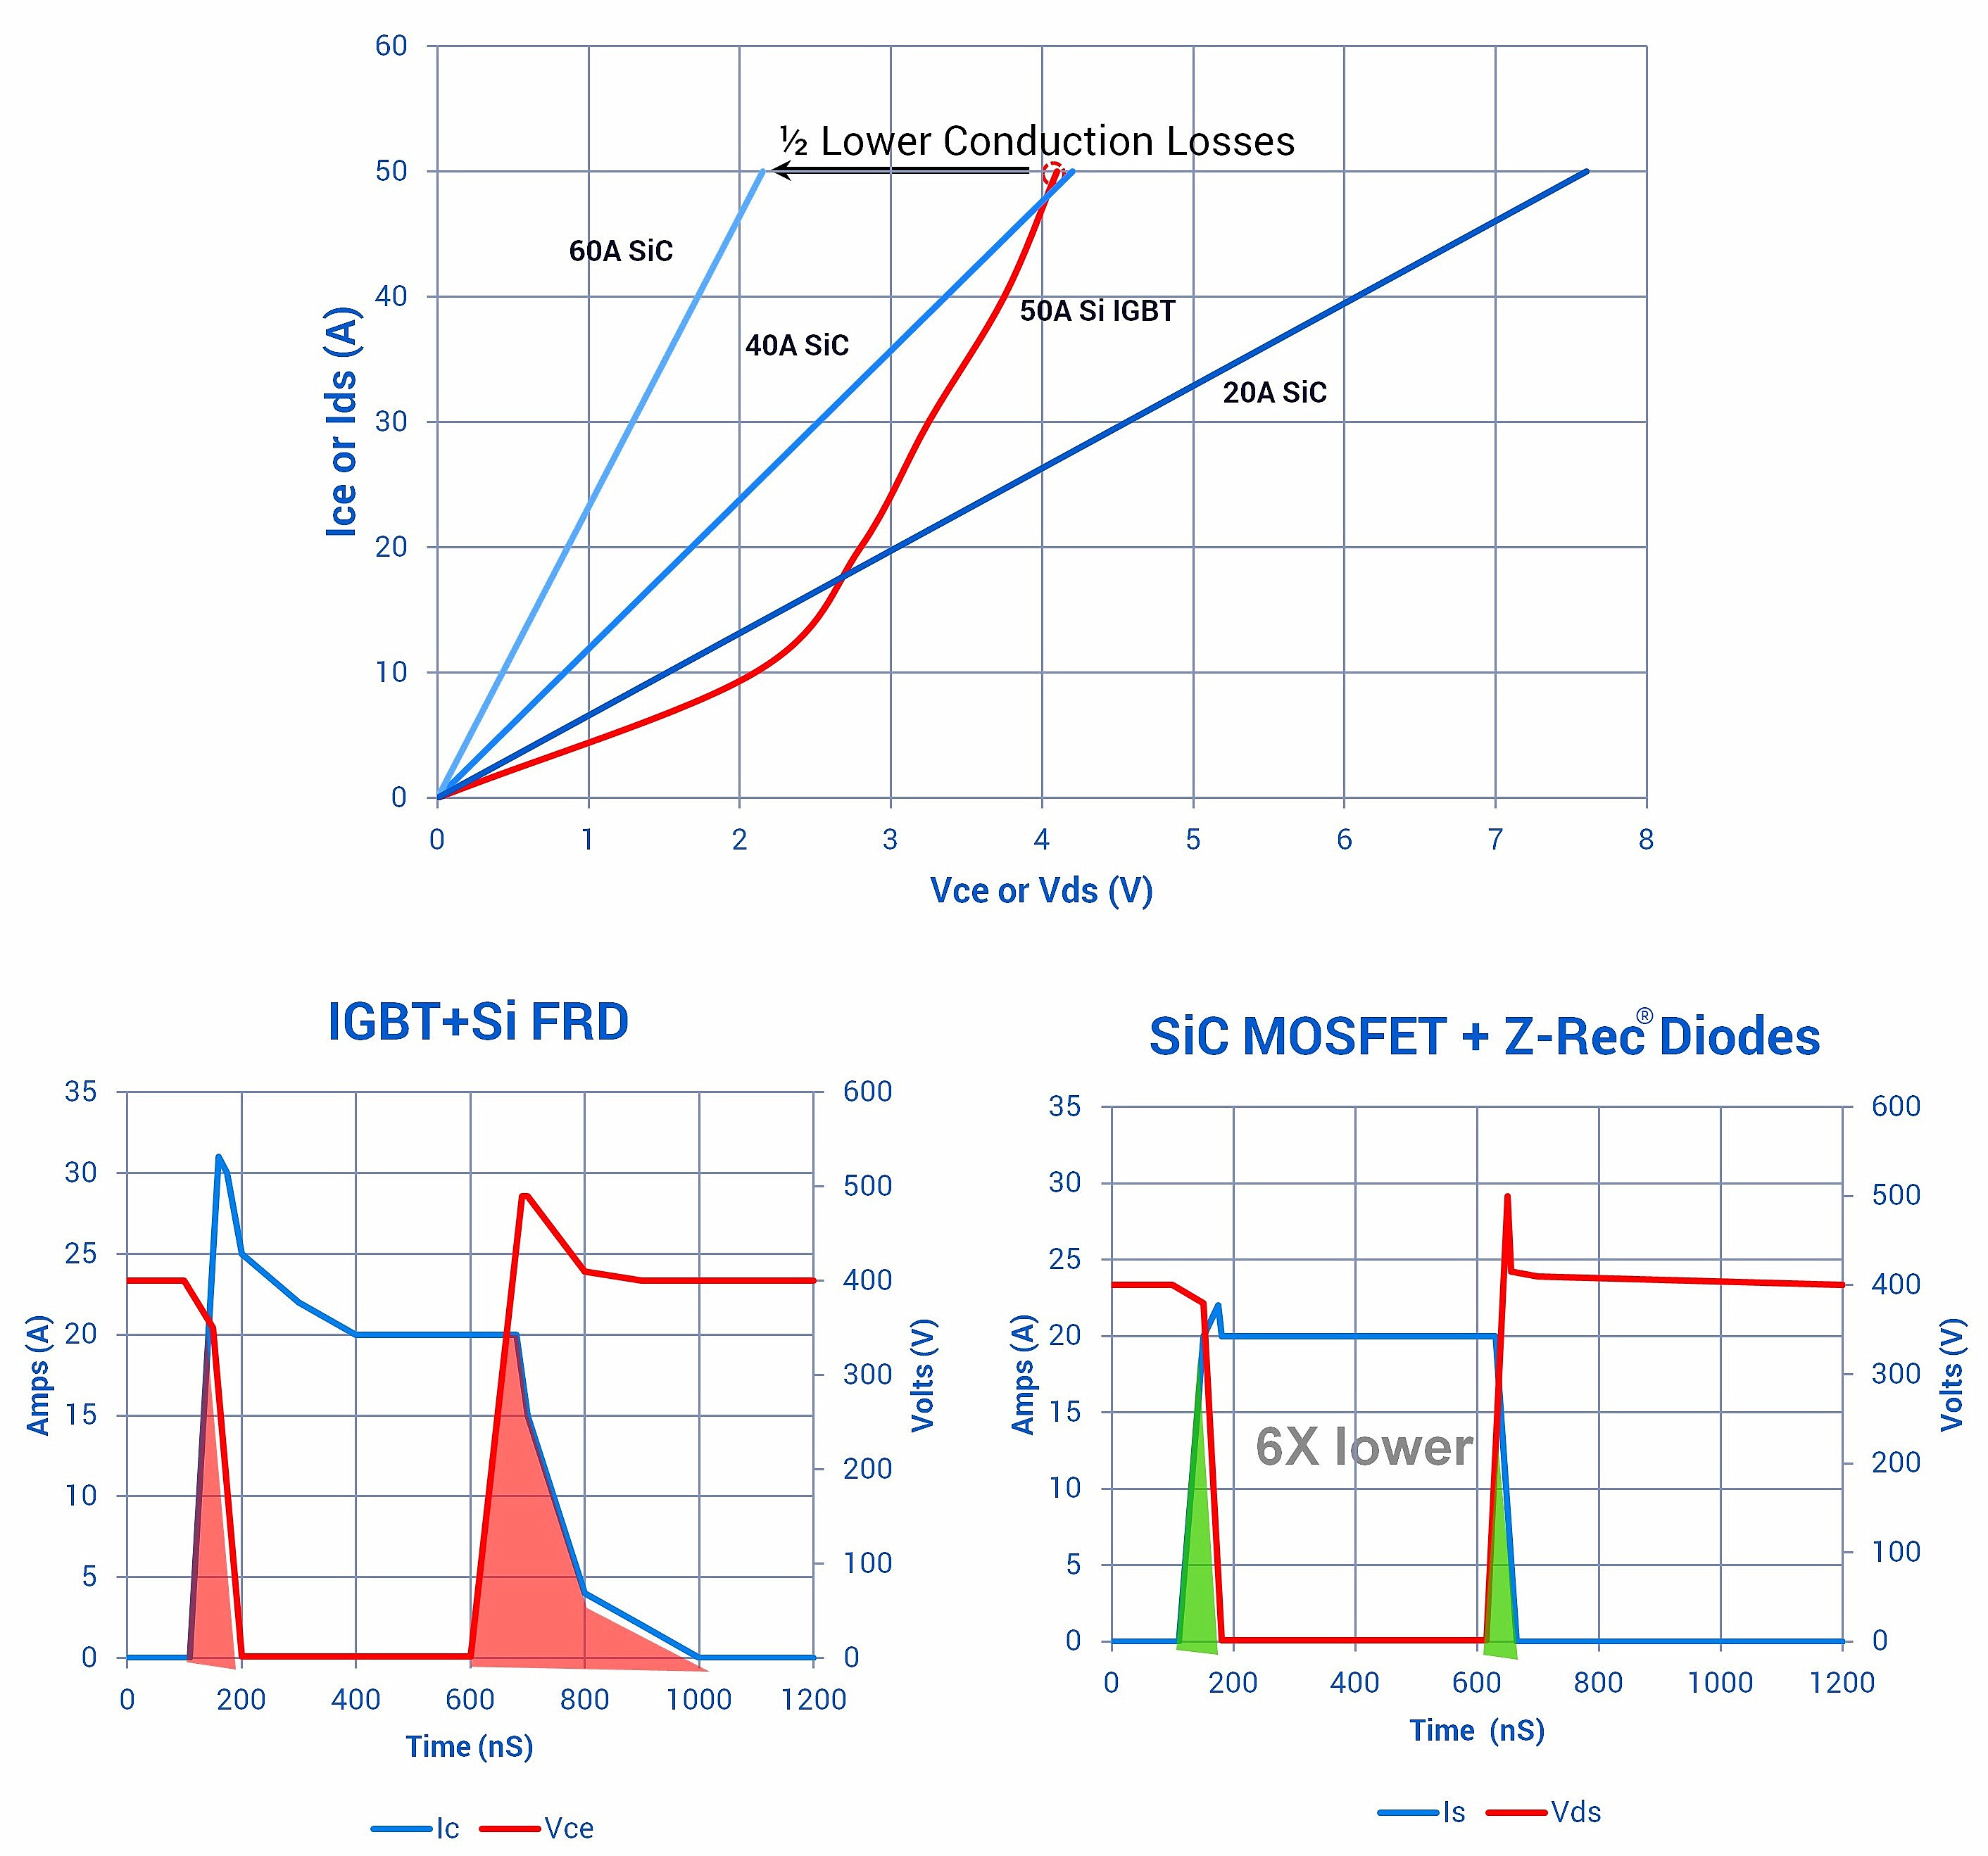 Figure 1: Comparison of conduction and switching losses in Si IGBTs and SiC MOSFETs